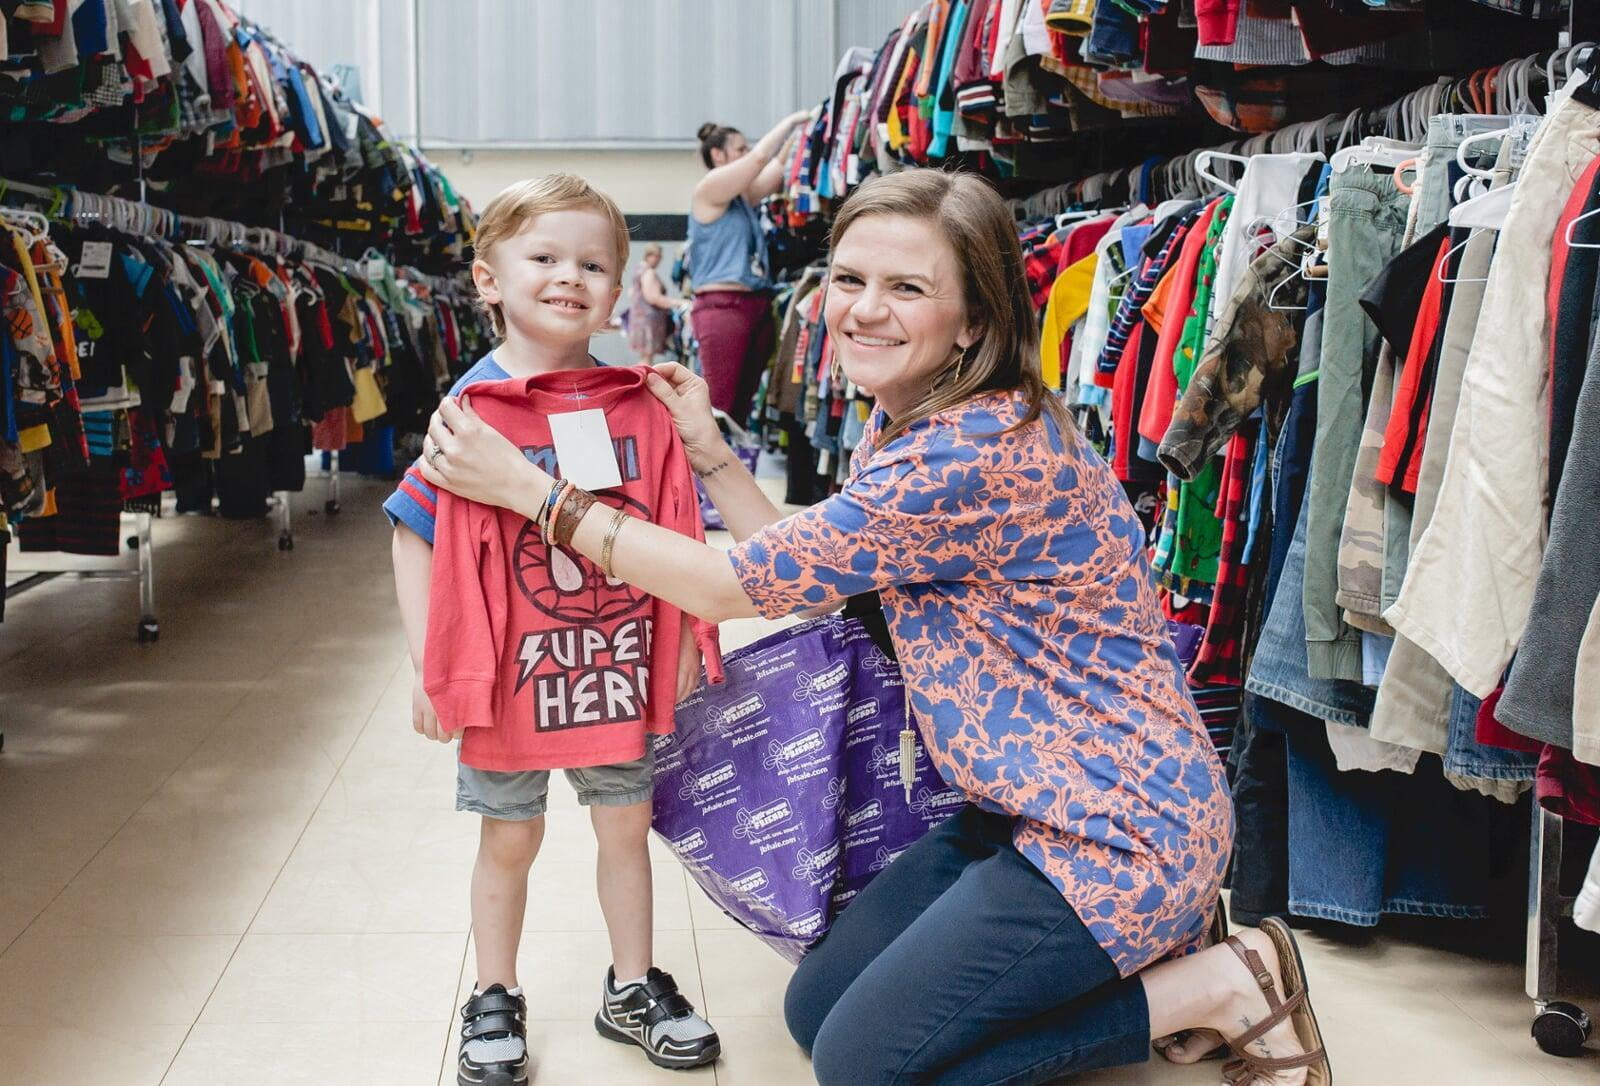 A mother and son stand in a clothing aisle while mom holds up a shirt to see if it will fit son.